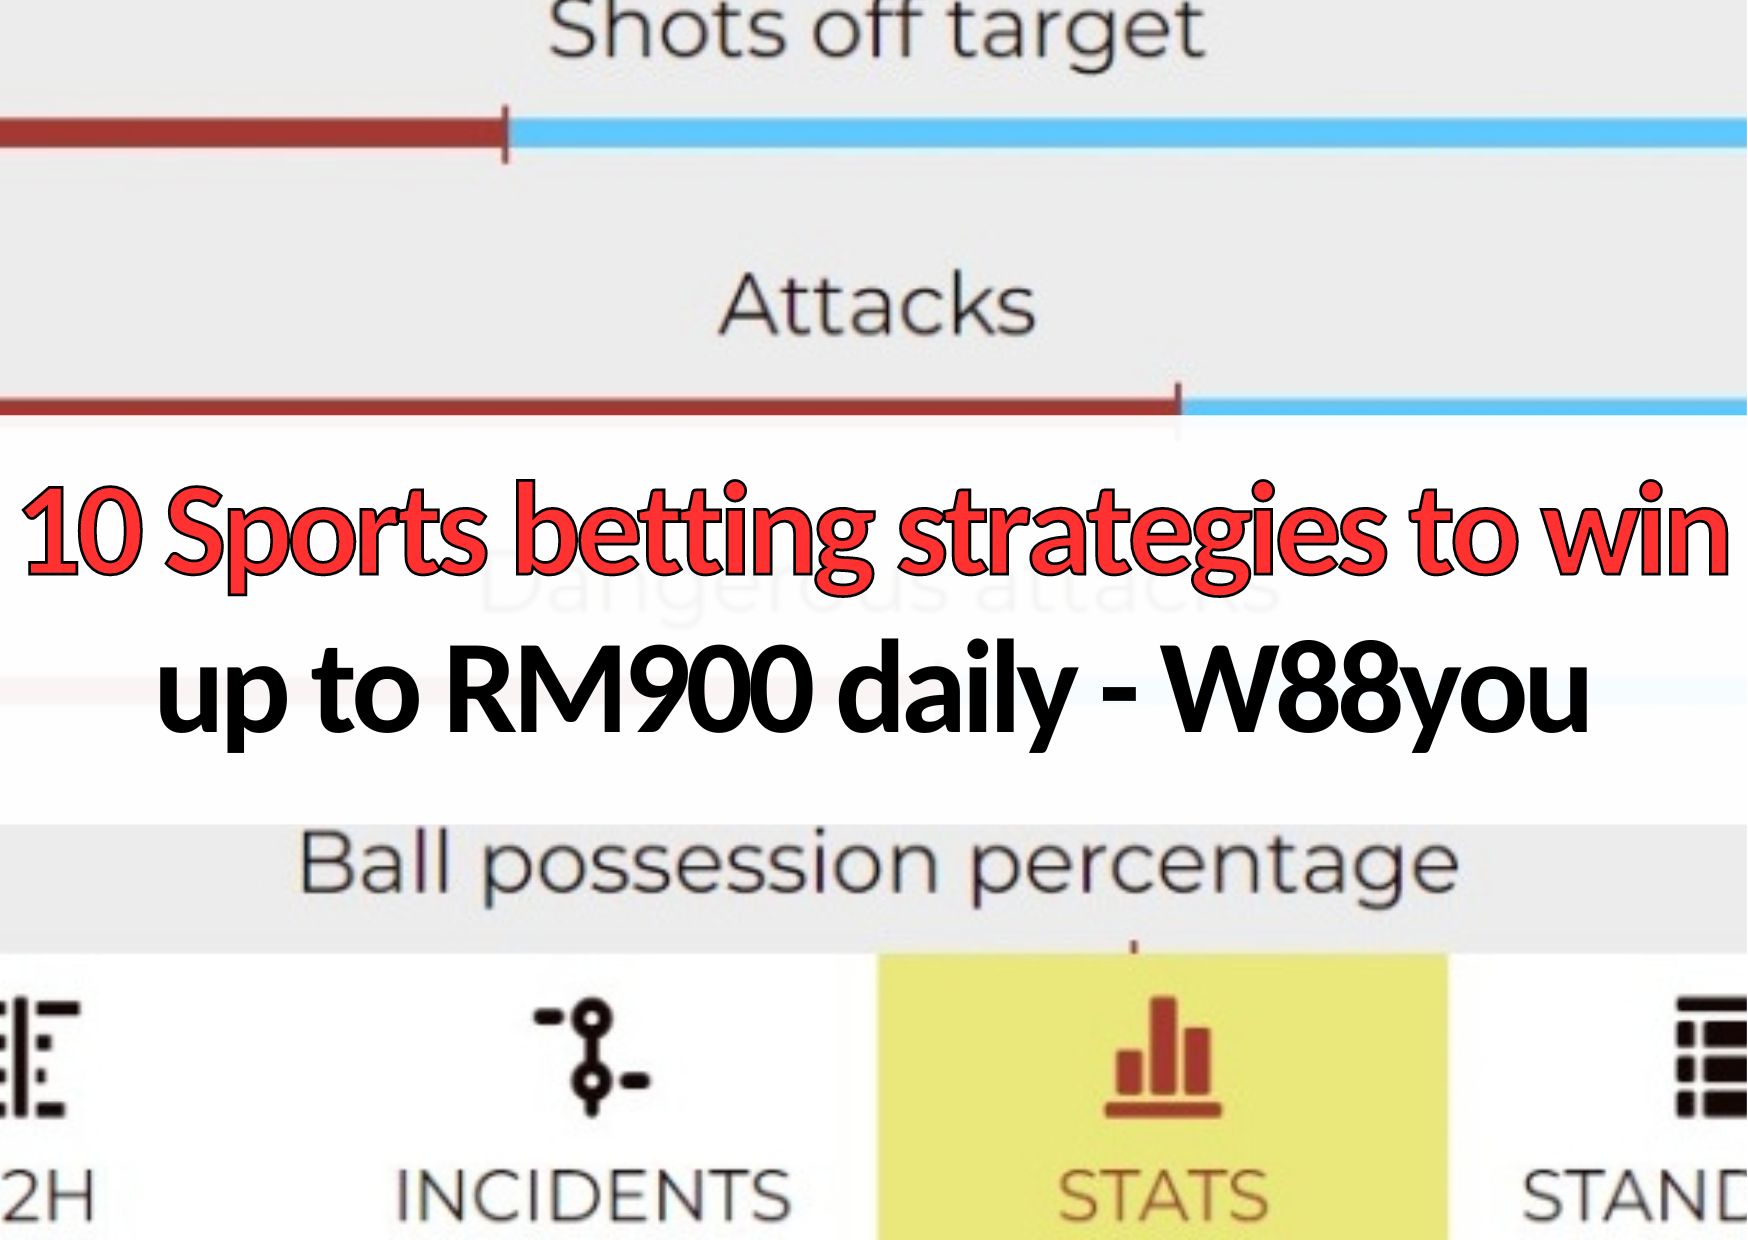 w88you 10 sports betting strategies to win daily